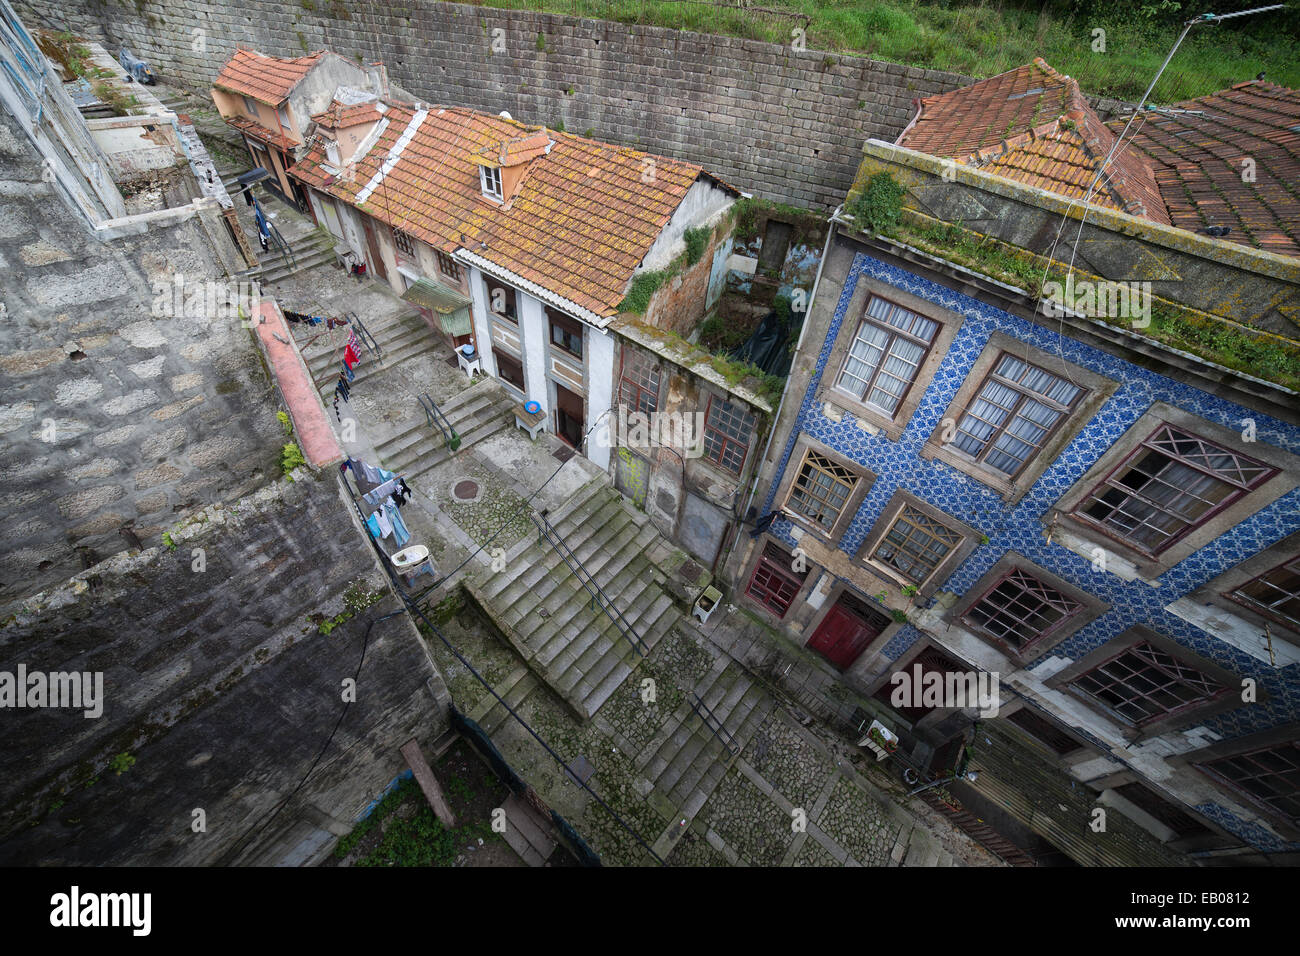 Porto in Portugal, traditional Portuguese houses along city alley with steps, looking down from above view. Stock Photo